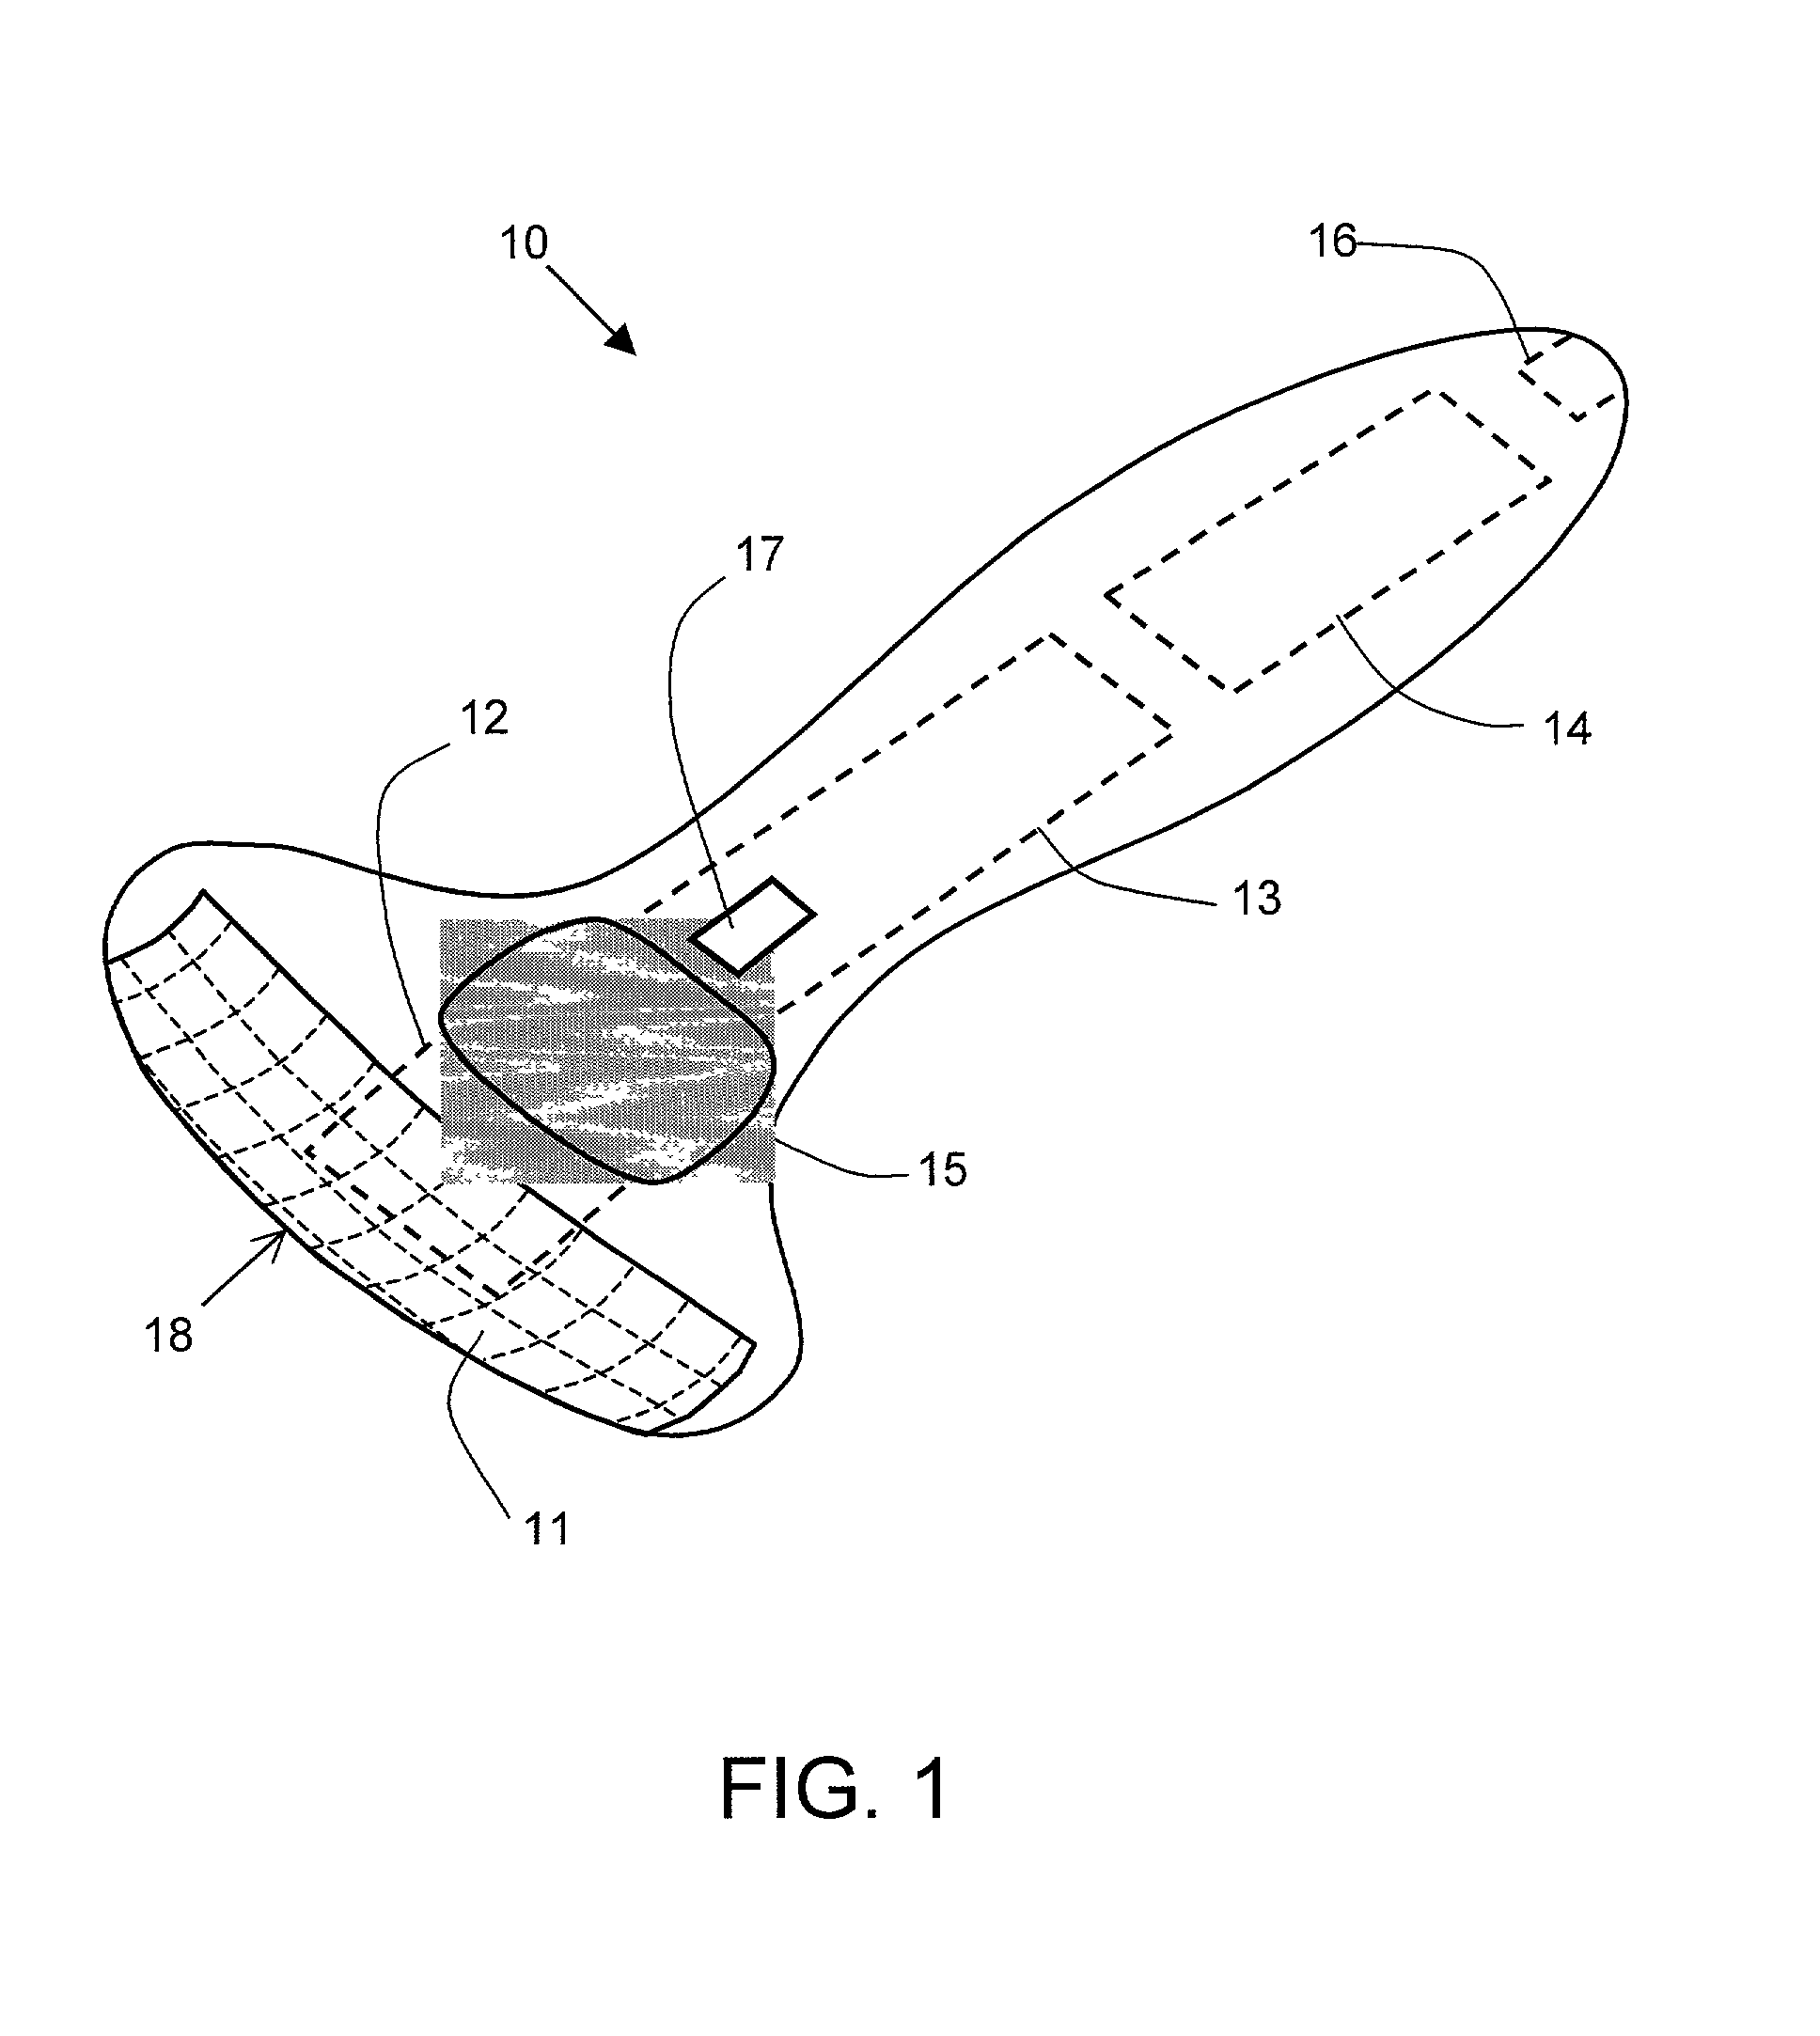 Self-palpation device for examination of breast with 3-D positioning system